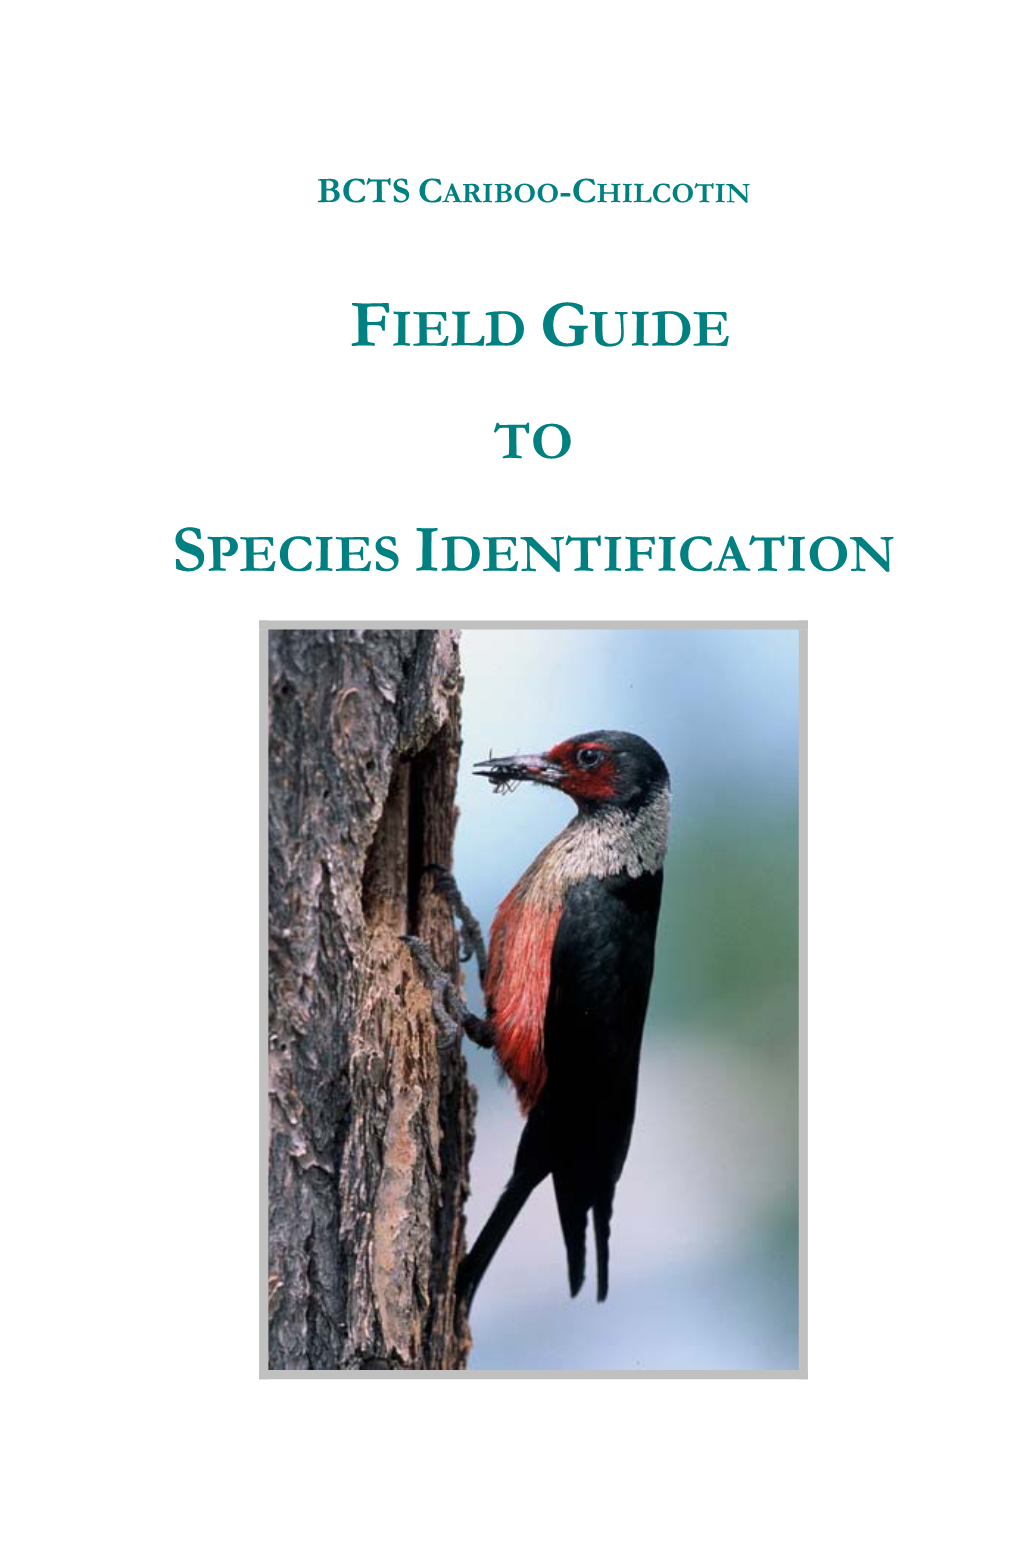 BCTS Field Identification Guide to Plant Species of Management Concern